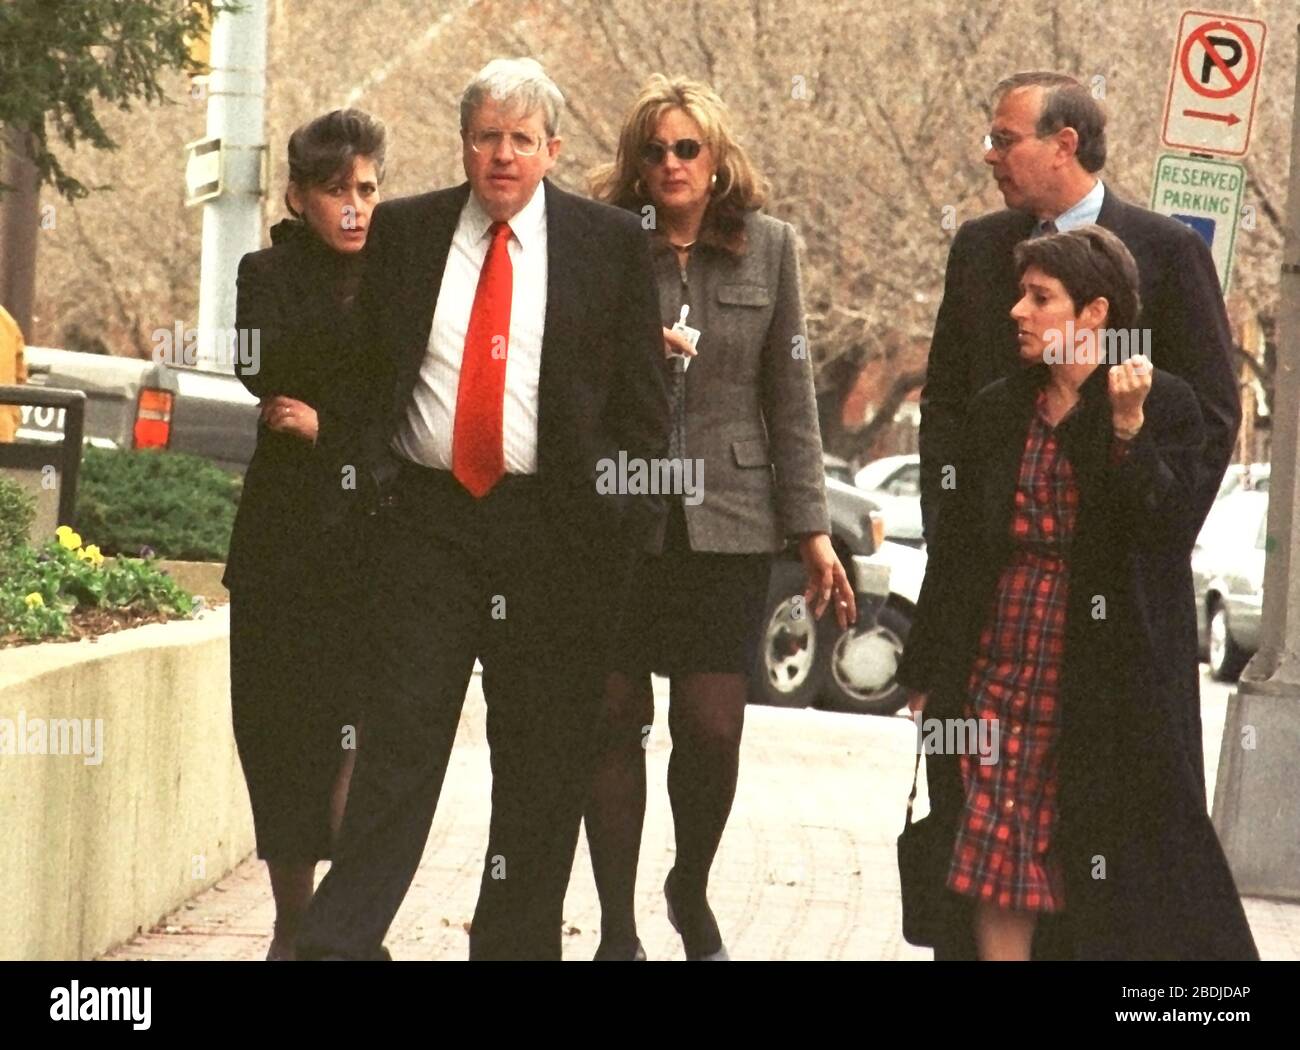 Arlington, VA - March 3, 1999 -- Linda Tripp (wearing a gray jacket) with unidentified people on Wilson Blvd in front of the building where she now works on 3 March, 1999.Credit: Ron Sachs/CNP (RESTRICTION: NO New York or New Jersey Newspapers or newspapers within a 75 mile radius of New York City) | usage worldwide Stock Photo